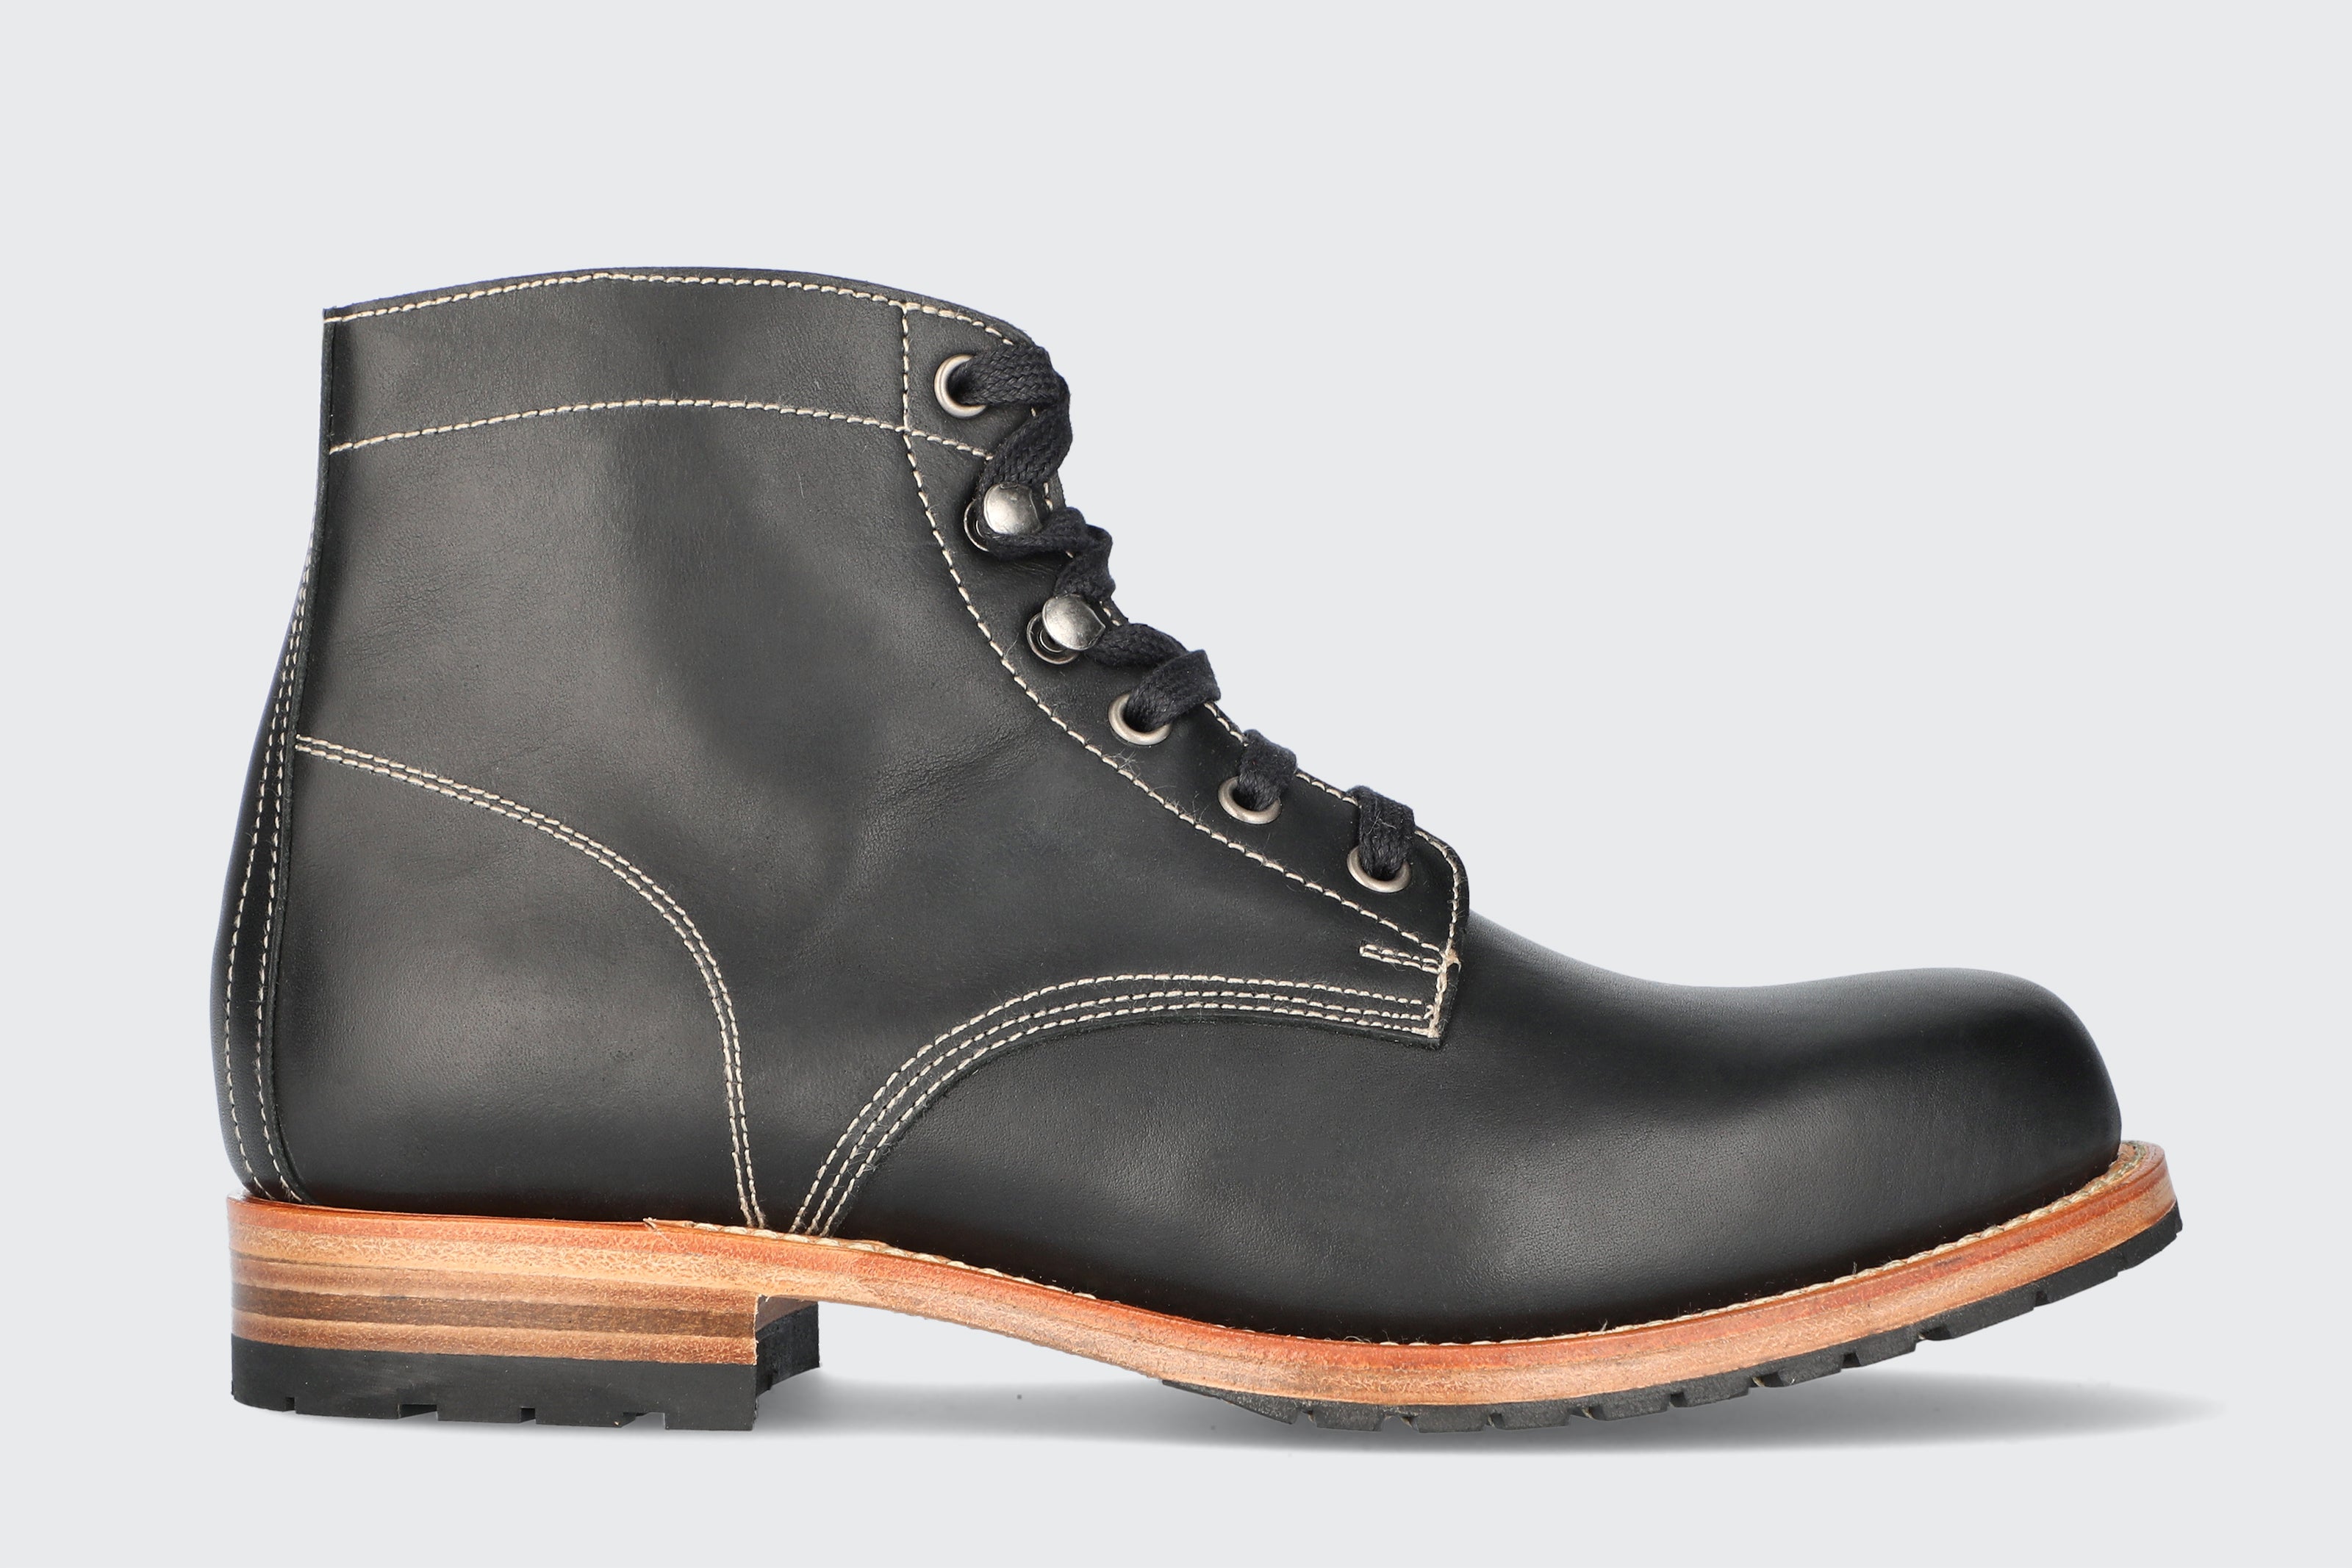 A men's black leather boot made by the Hartt Shoe Company 